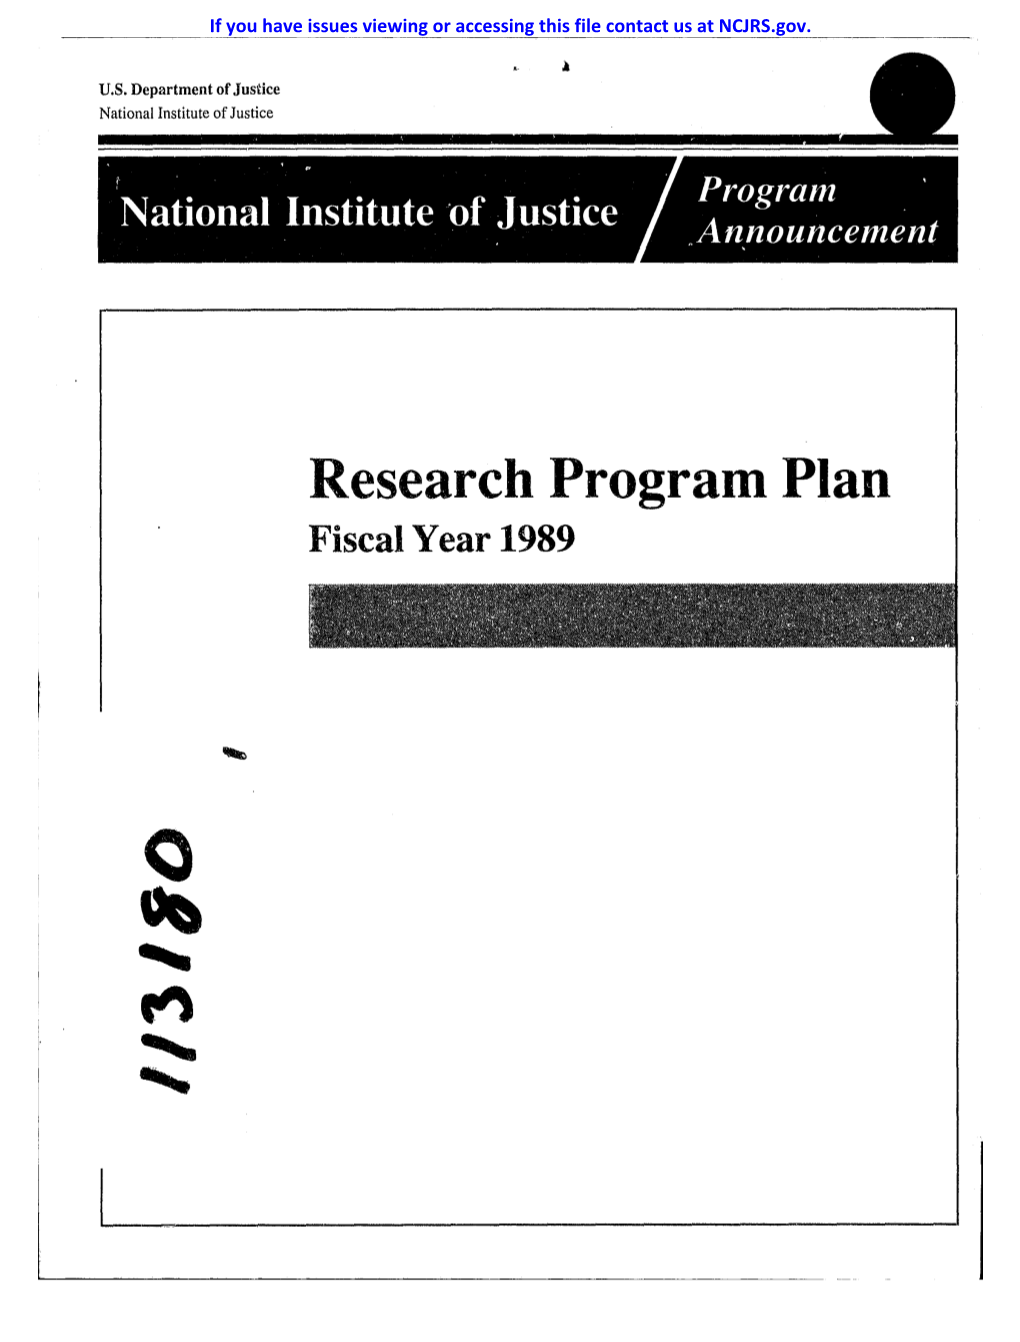 Crime and Justice Research Volumes Criminal Justice Interdiction of Staff of the National Institute Retail Drug Trafficking of Justice